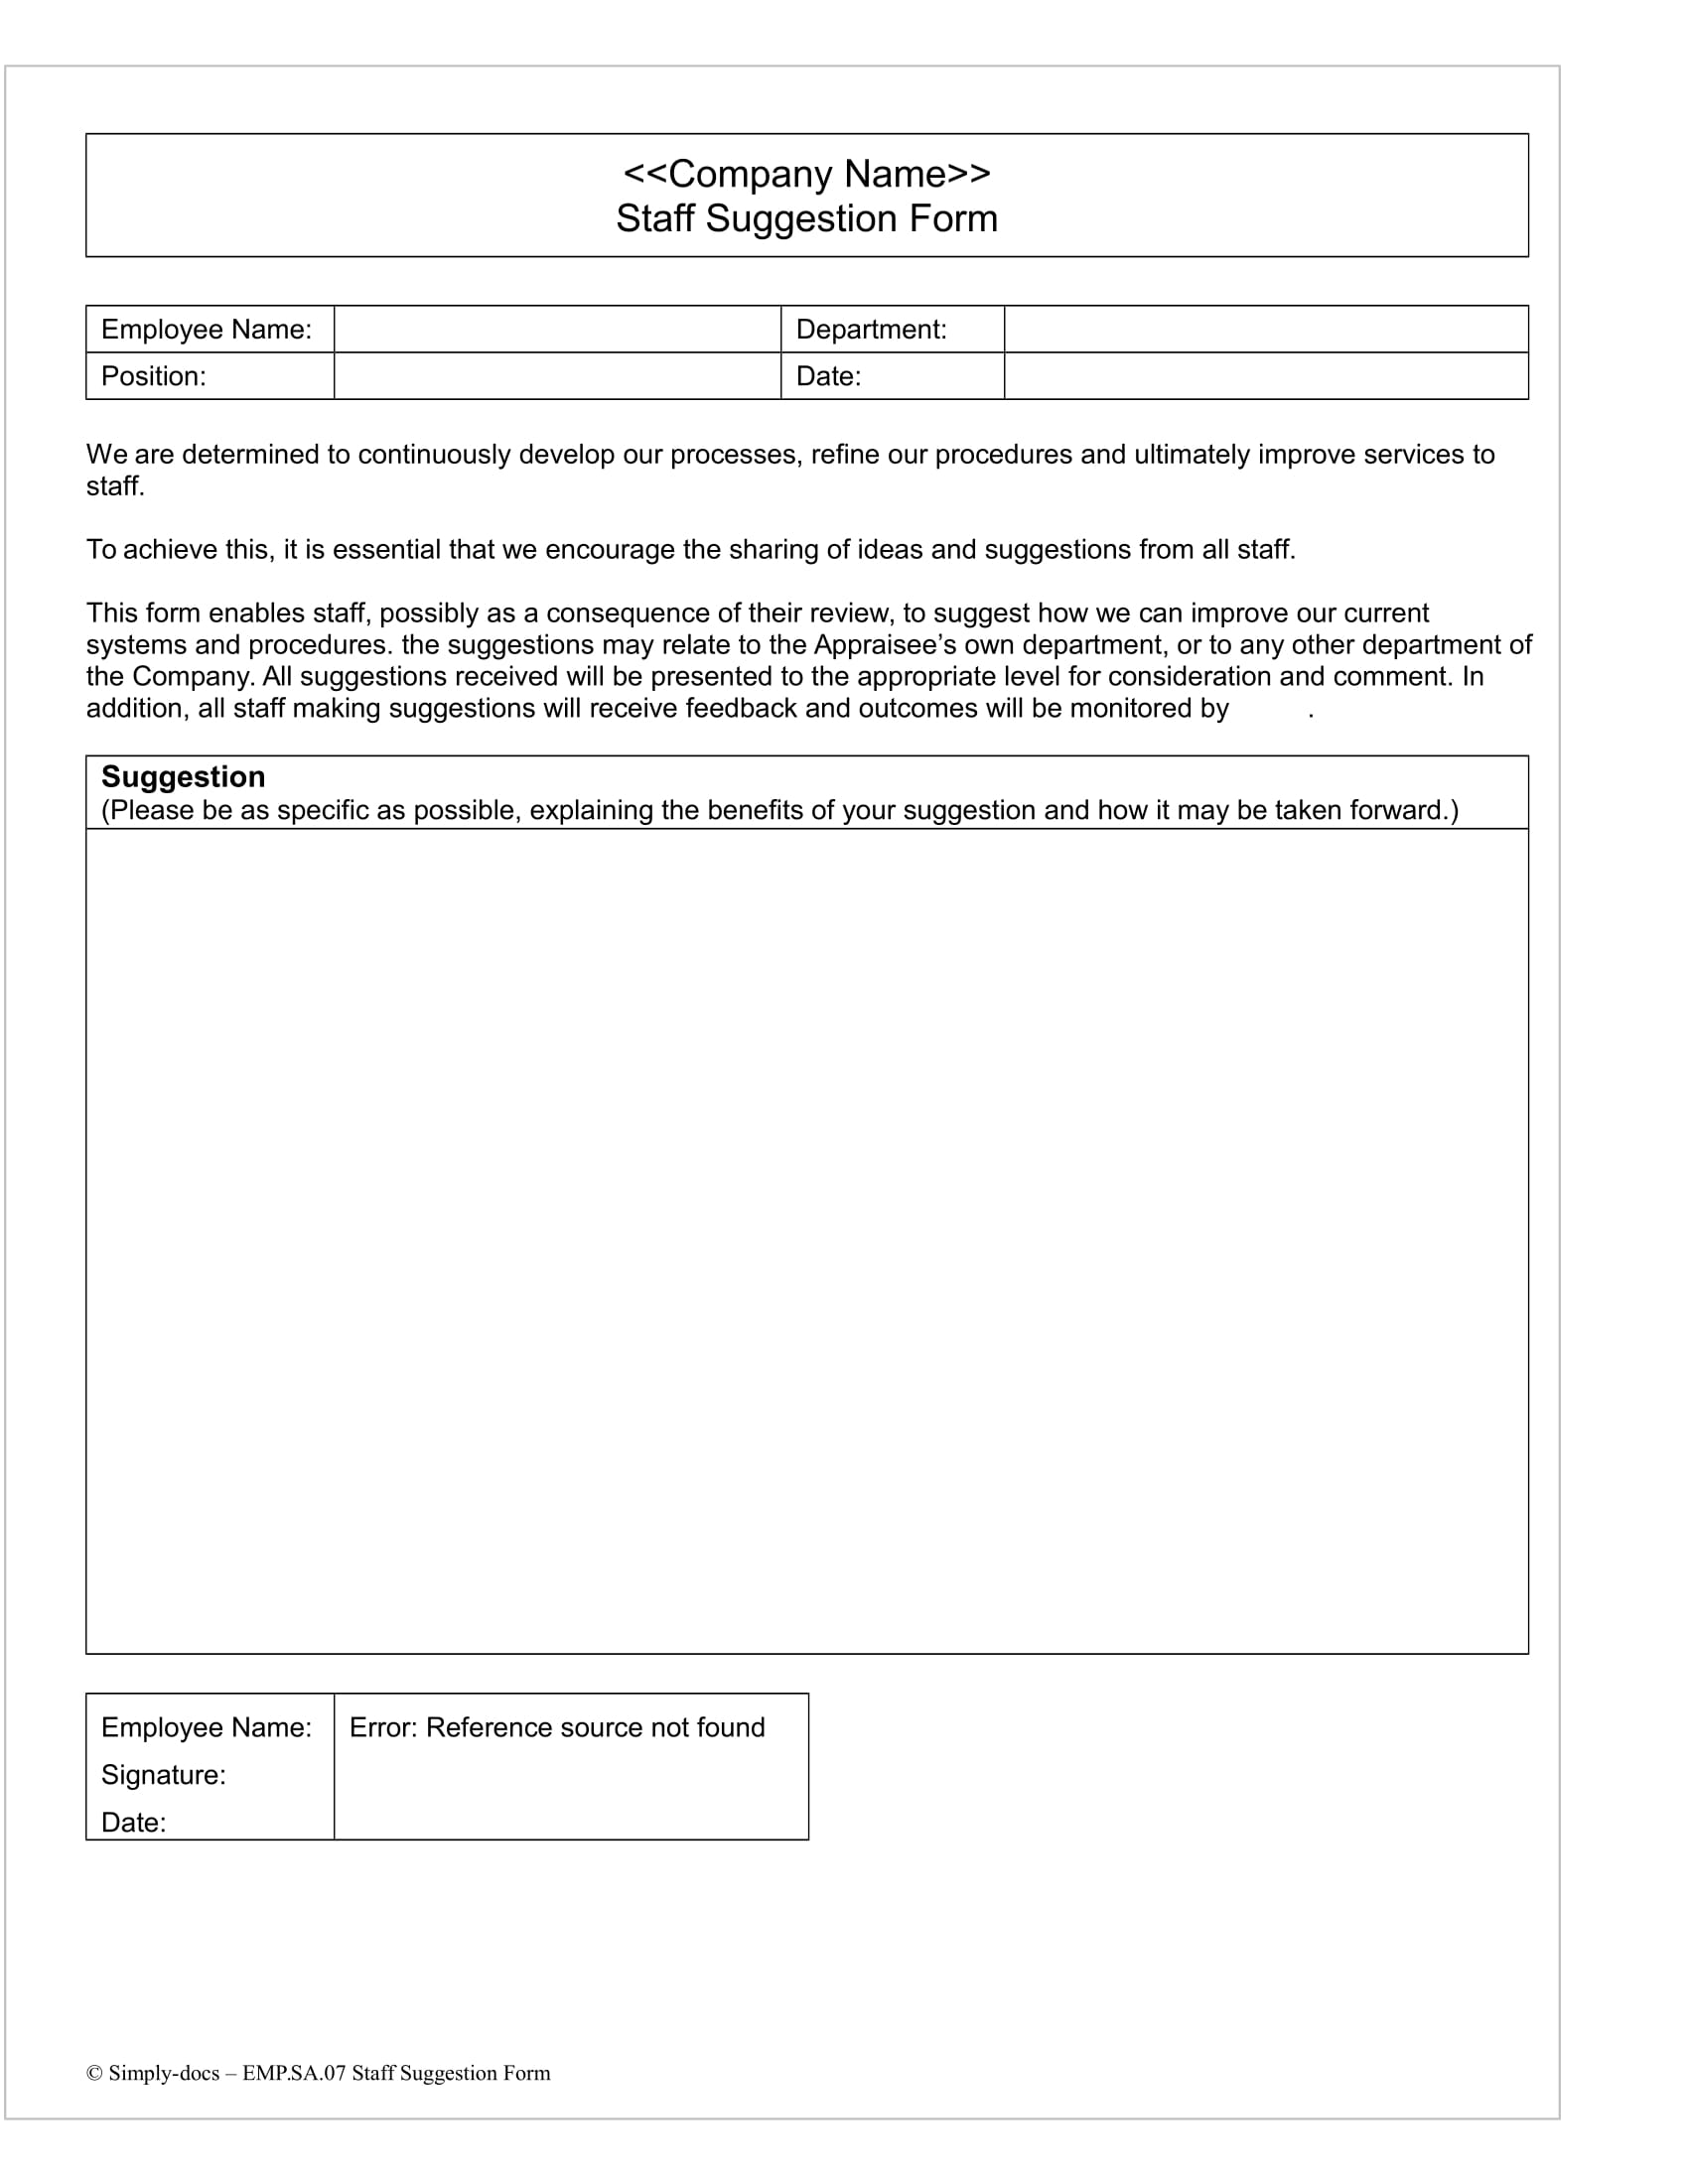 employee staff suggestion form in doc 1